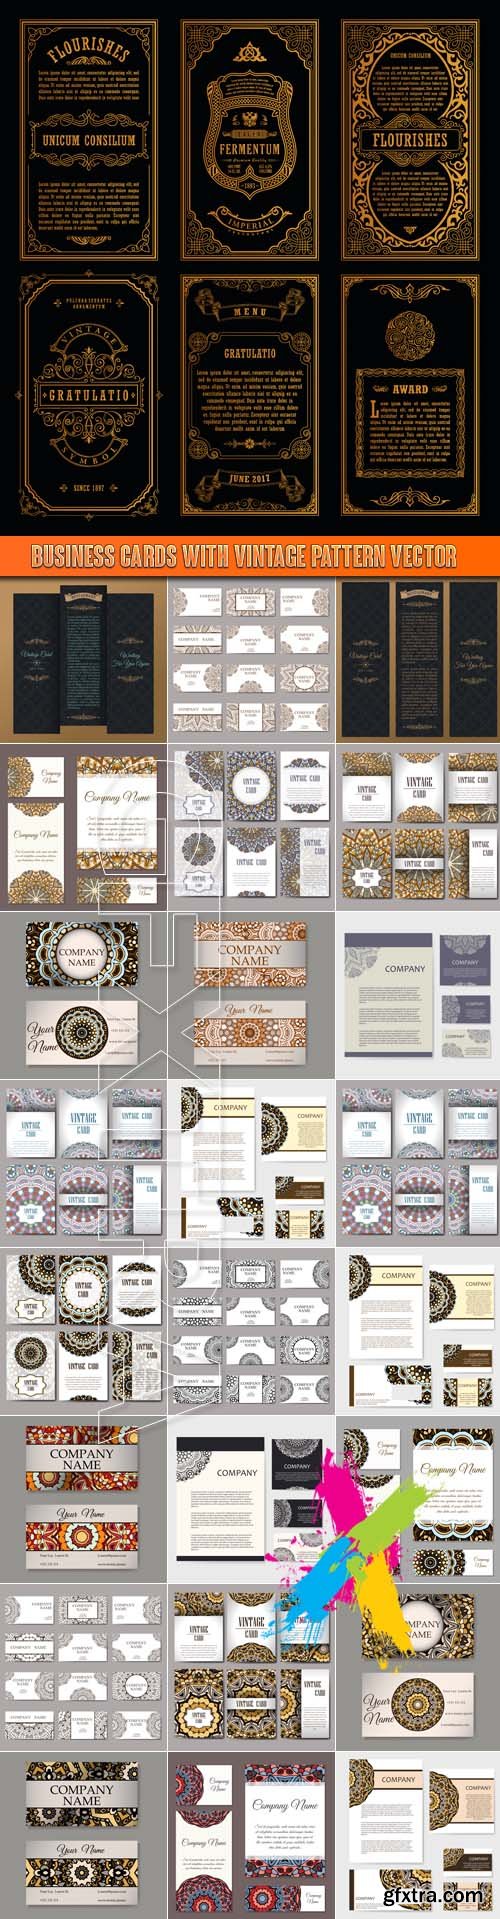 Business cards with vintage pattern vector